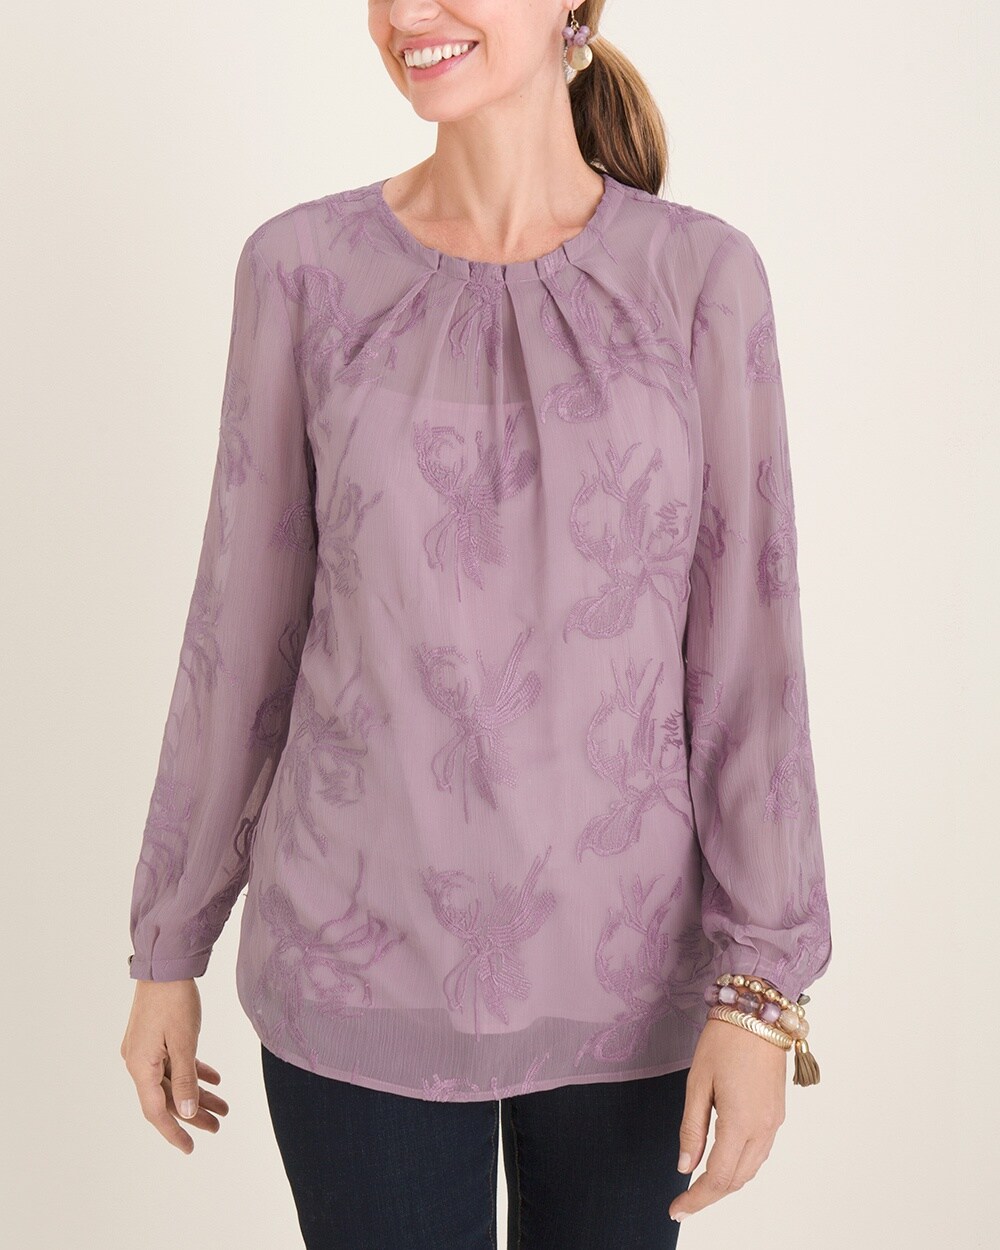 Tonal Embroidery Crinkle Top